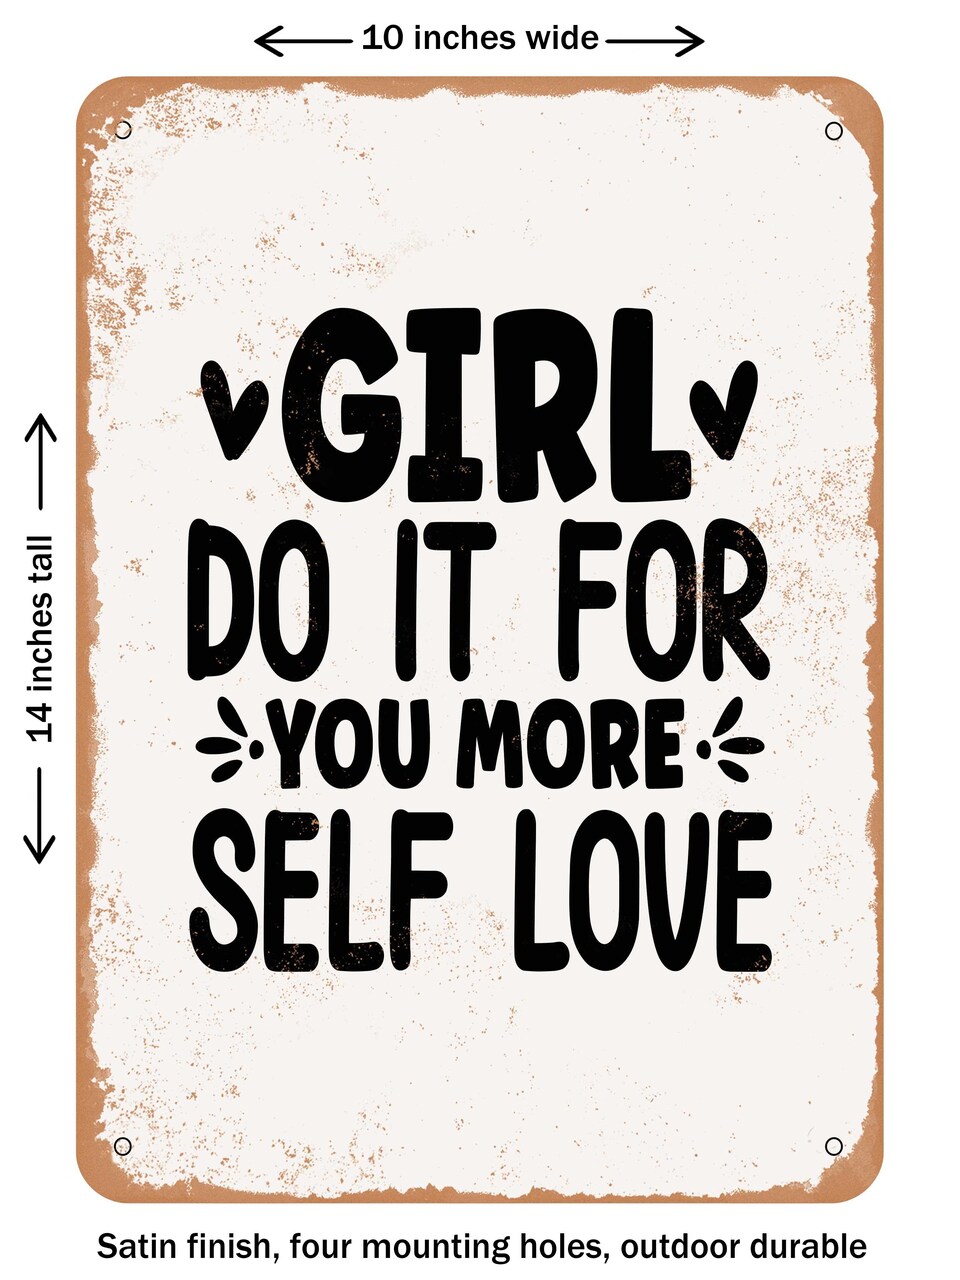 DECORATIVE METAL SIGN - Girl Do It For You More Self Love  - Vintage Rusty Look